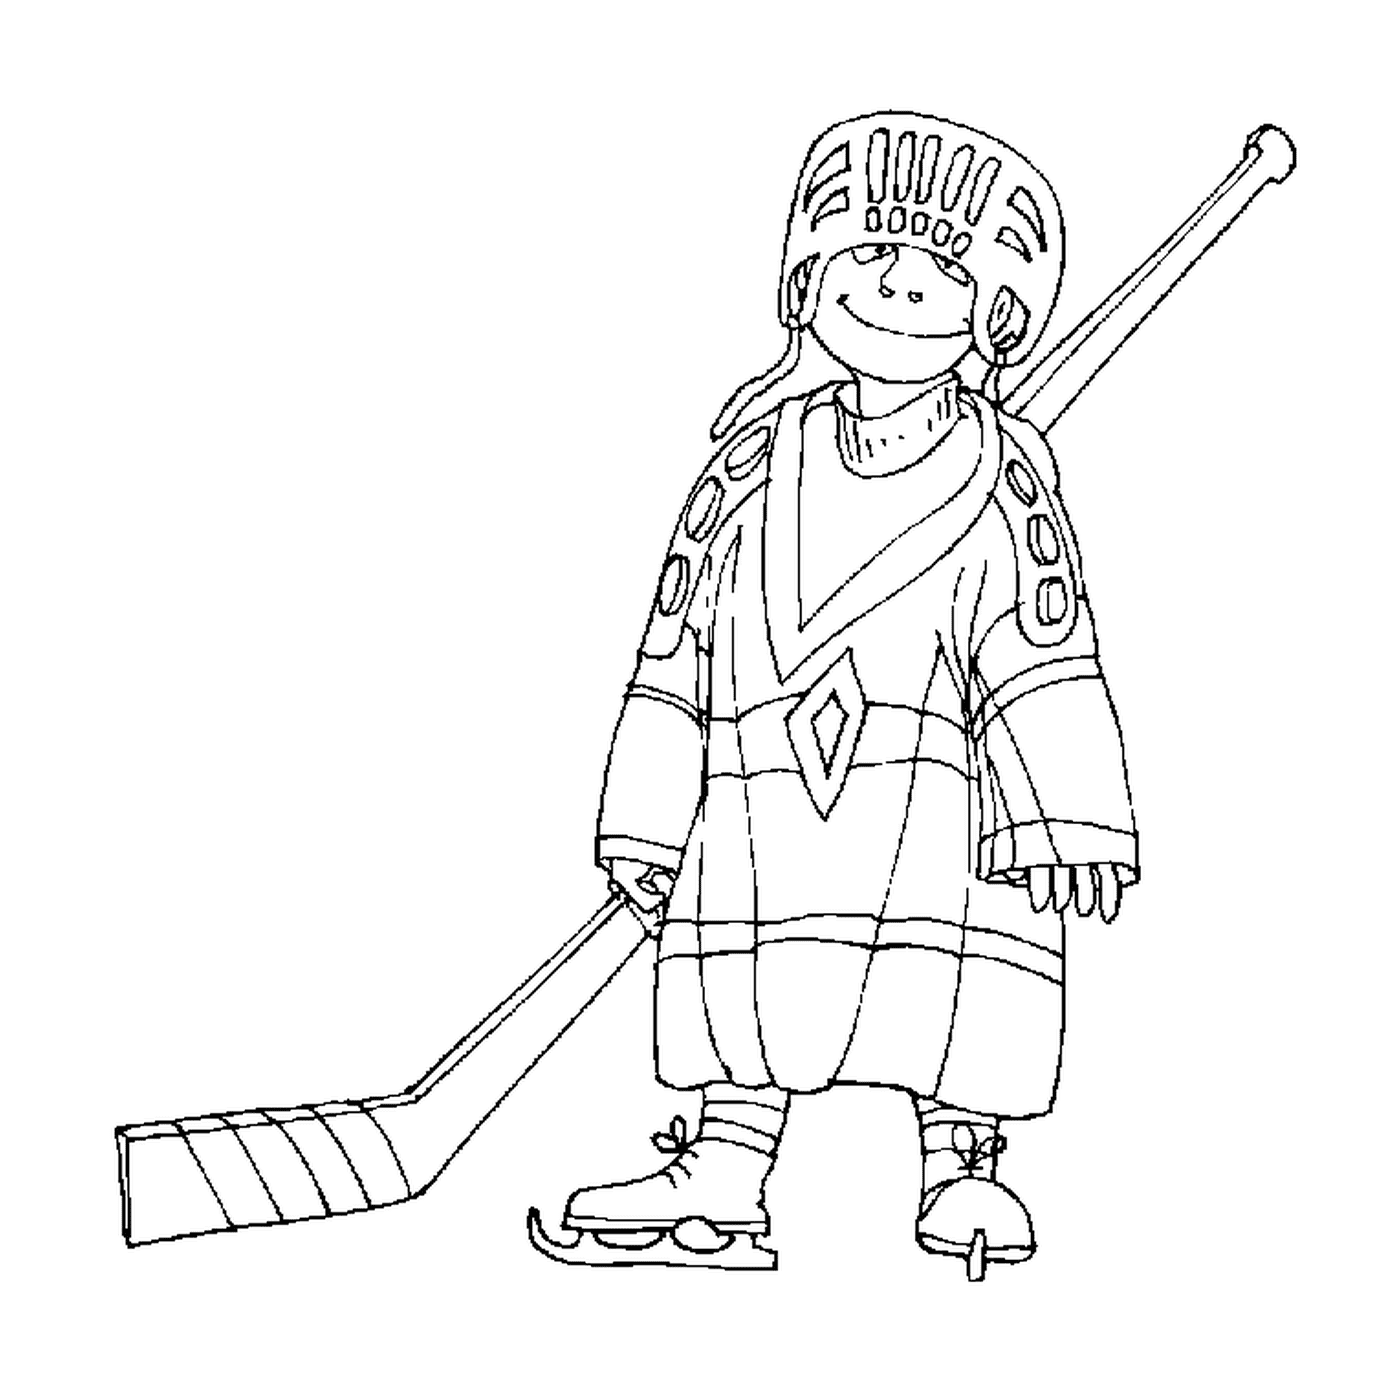  Young enthusiastic hockey player 